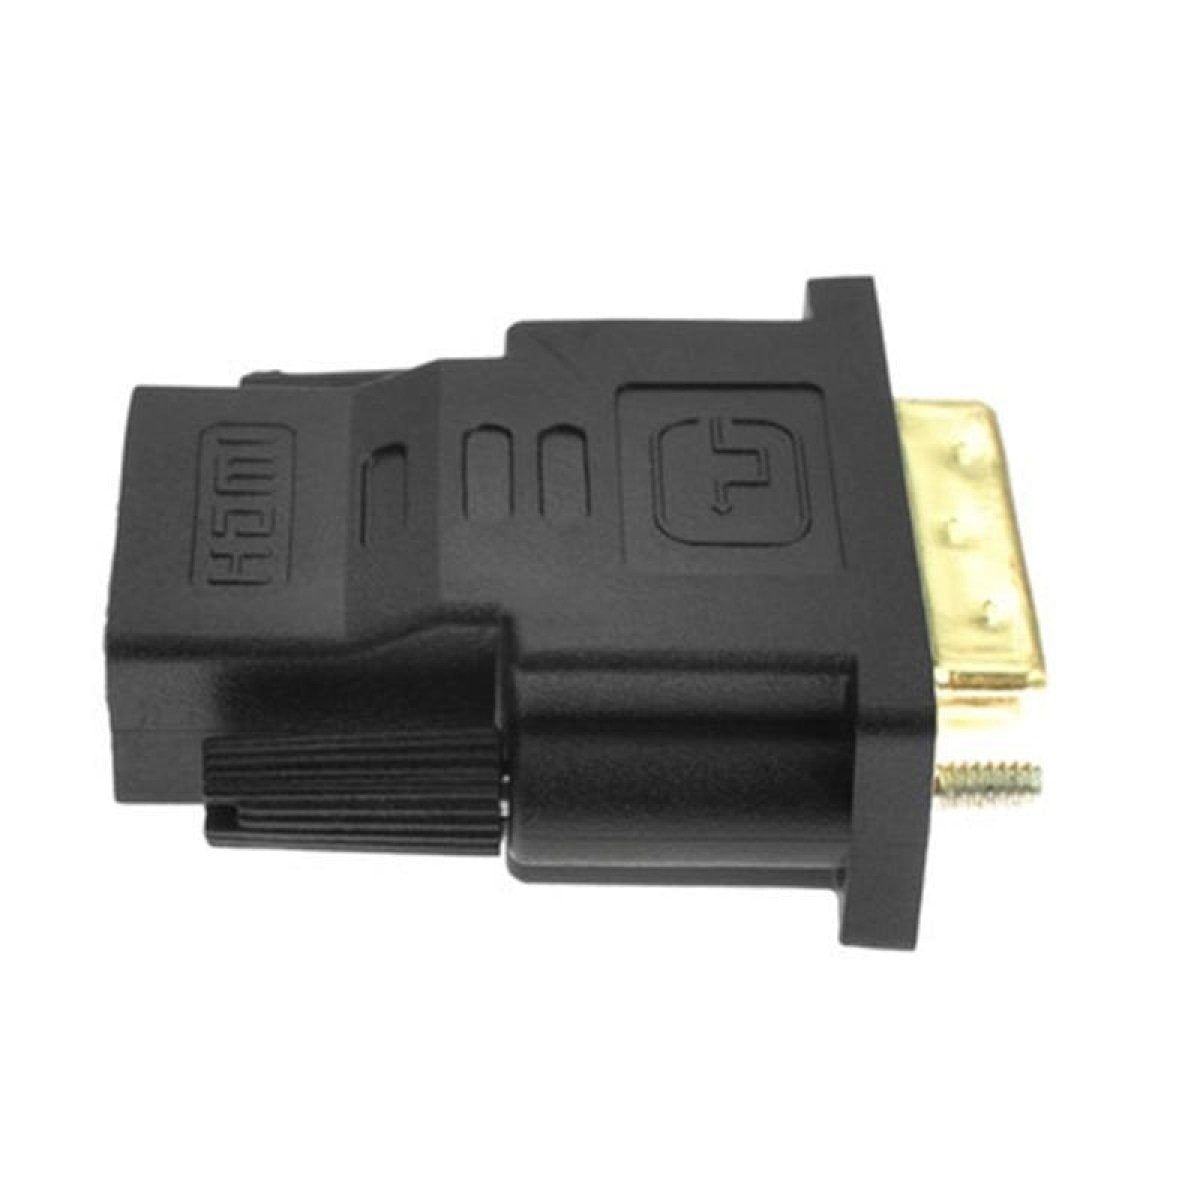 HDMI to DVI Cable 24+1 Pin Adaptor 4K Bi-Directional Male to HDMI Male Converter - 0.5m - Asia Sell